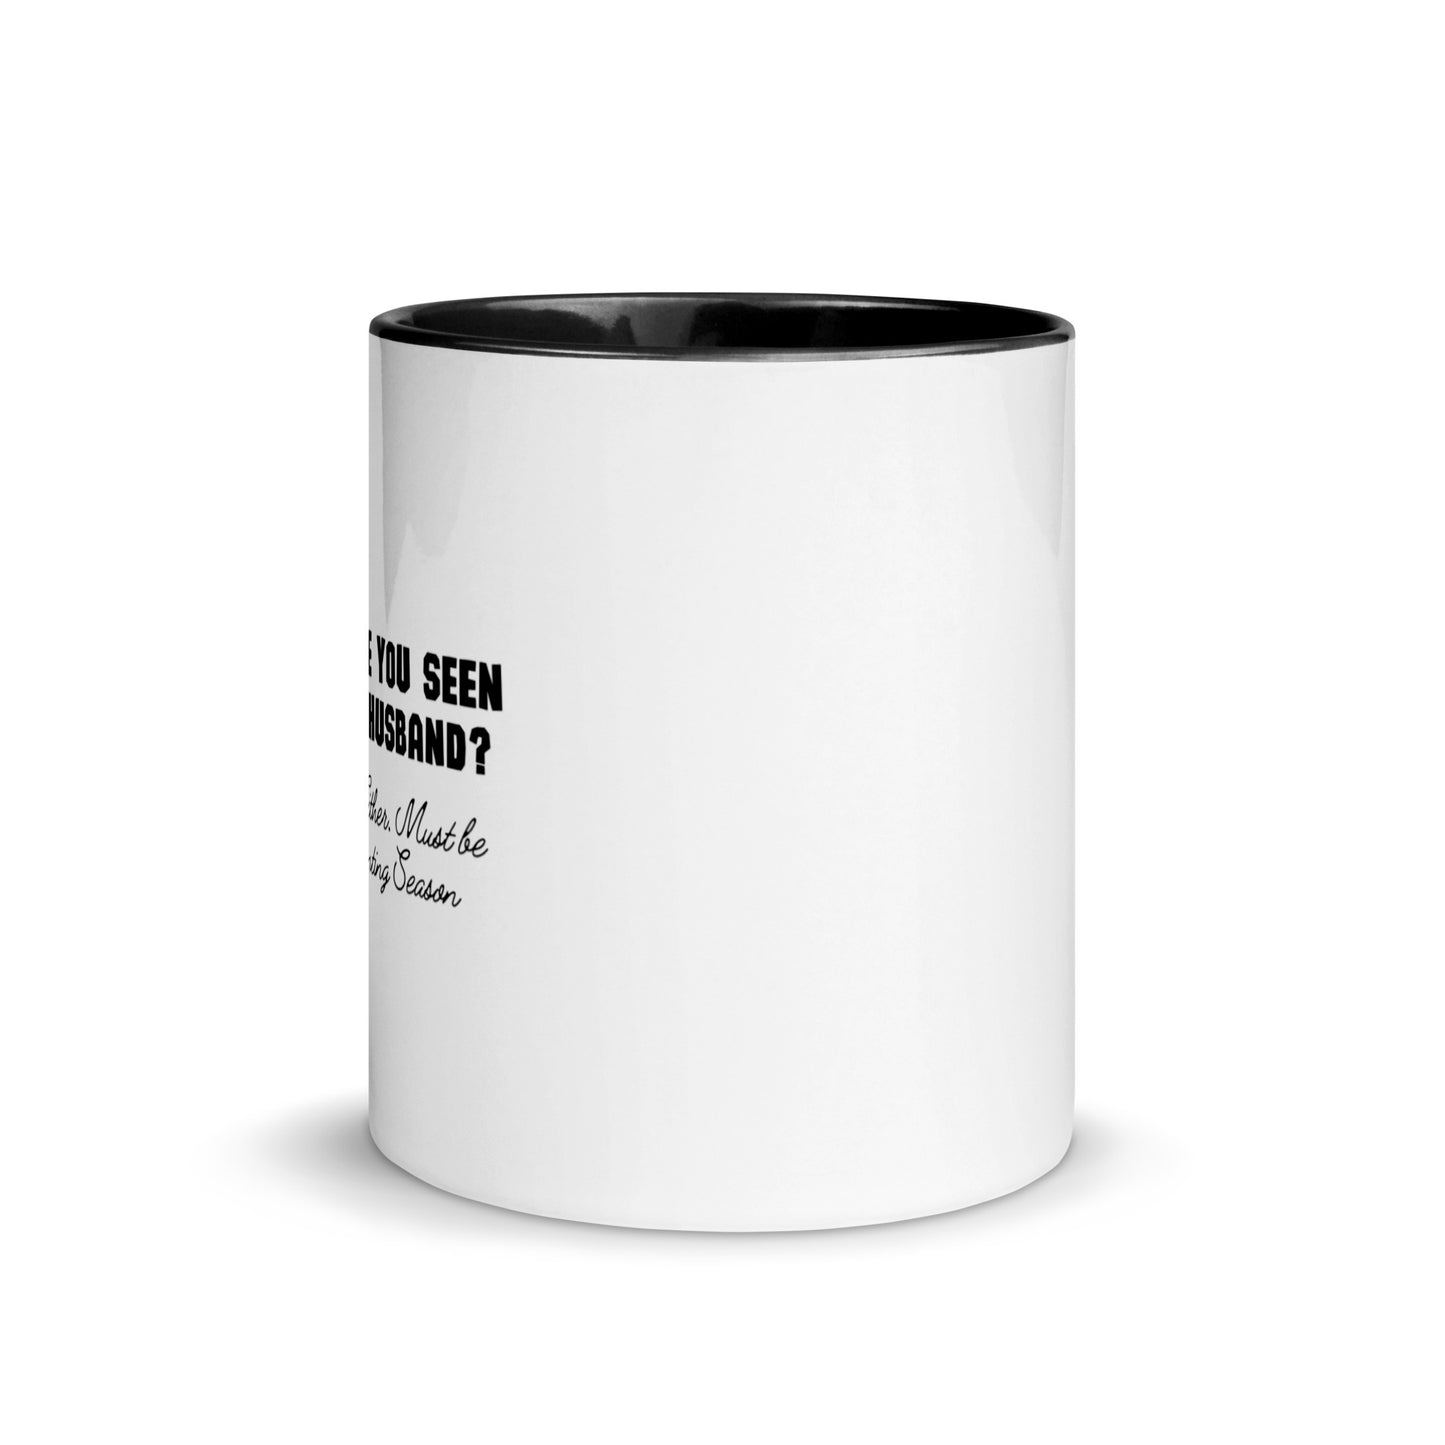 Have You Seen My Husband? Mug with Color Inside